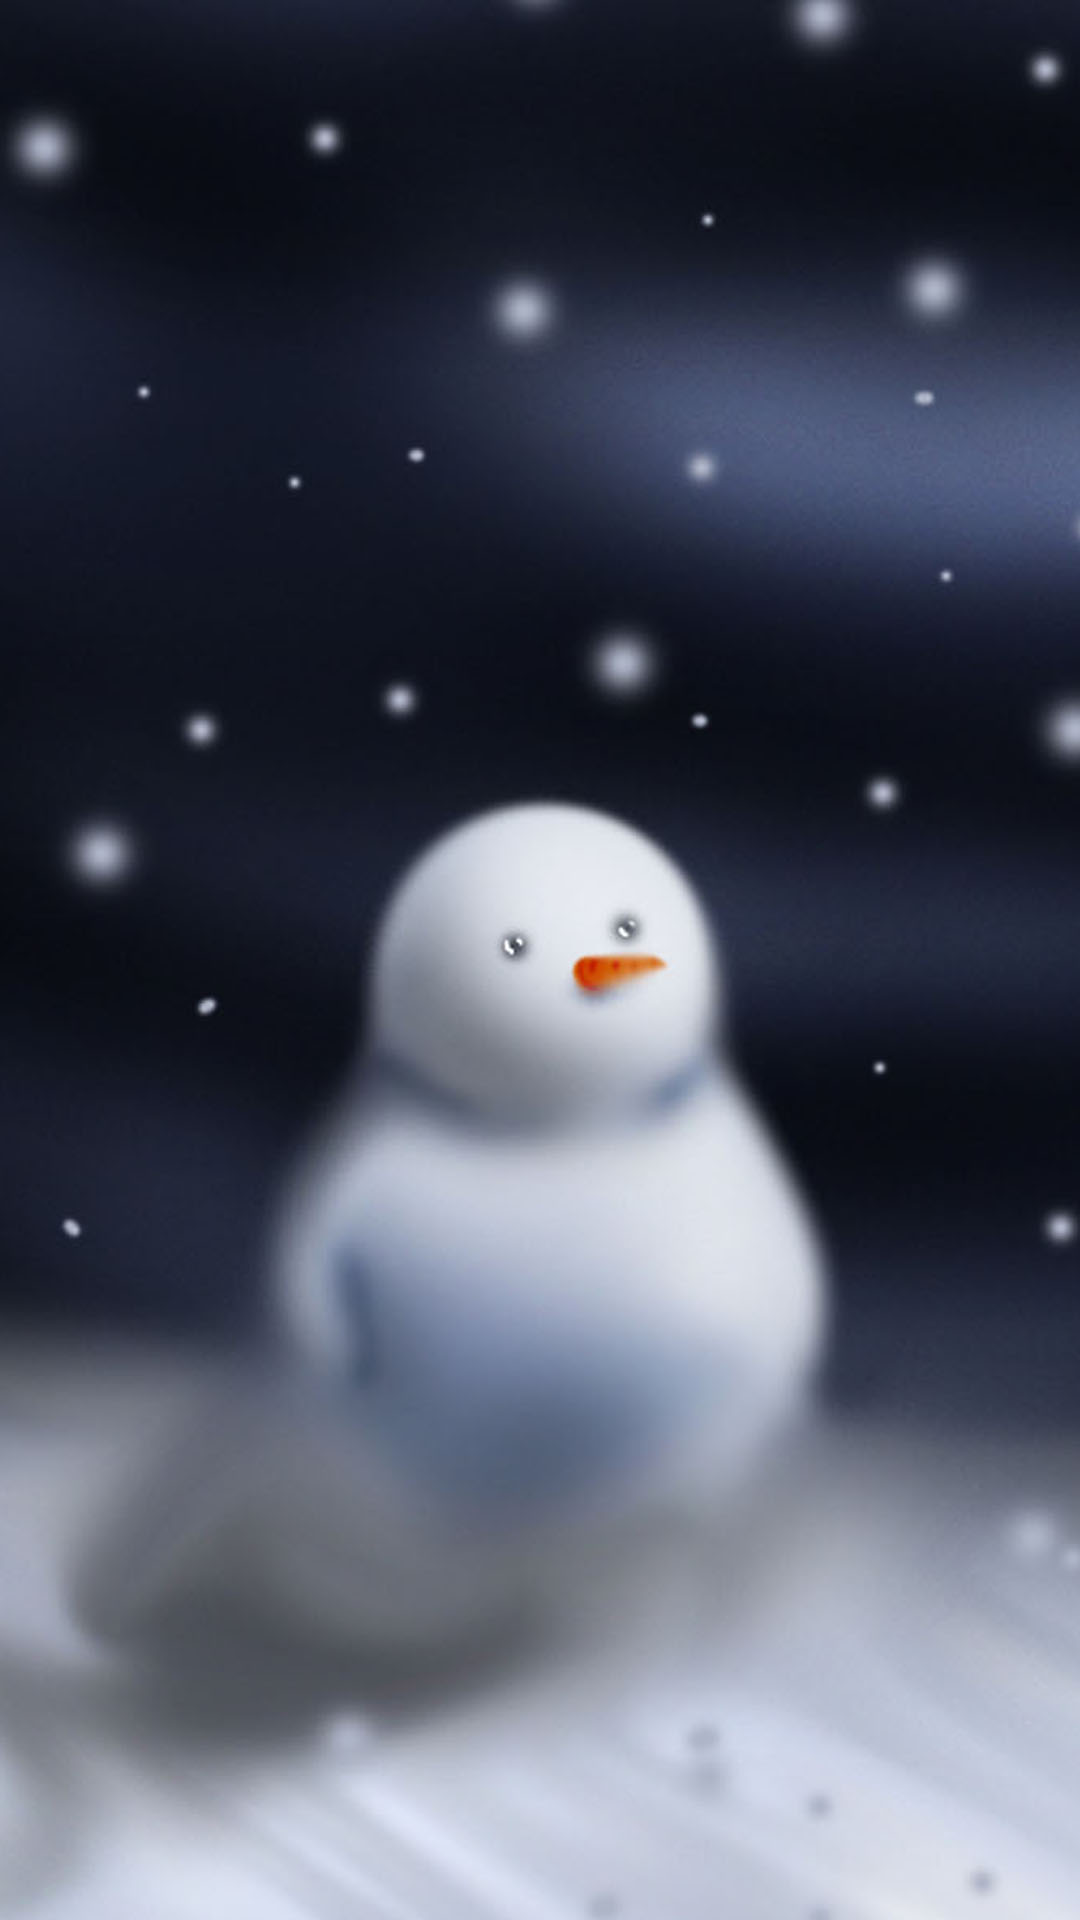 Samsung Galaxy S4 Active Wallpaper 3d Snowman Android